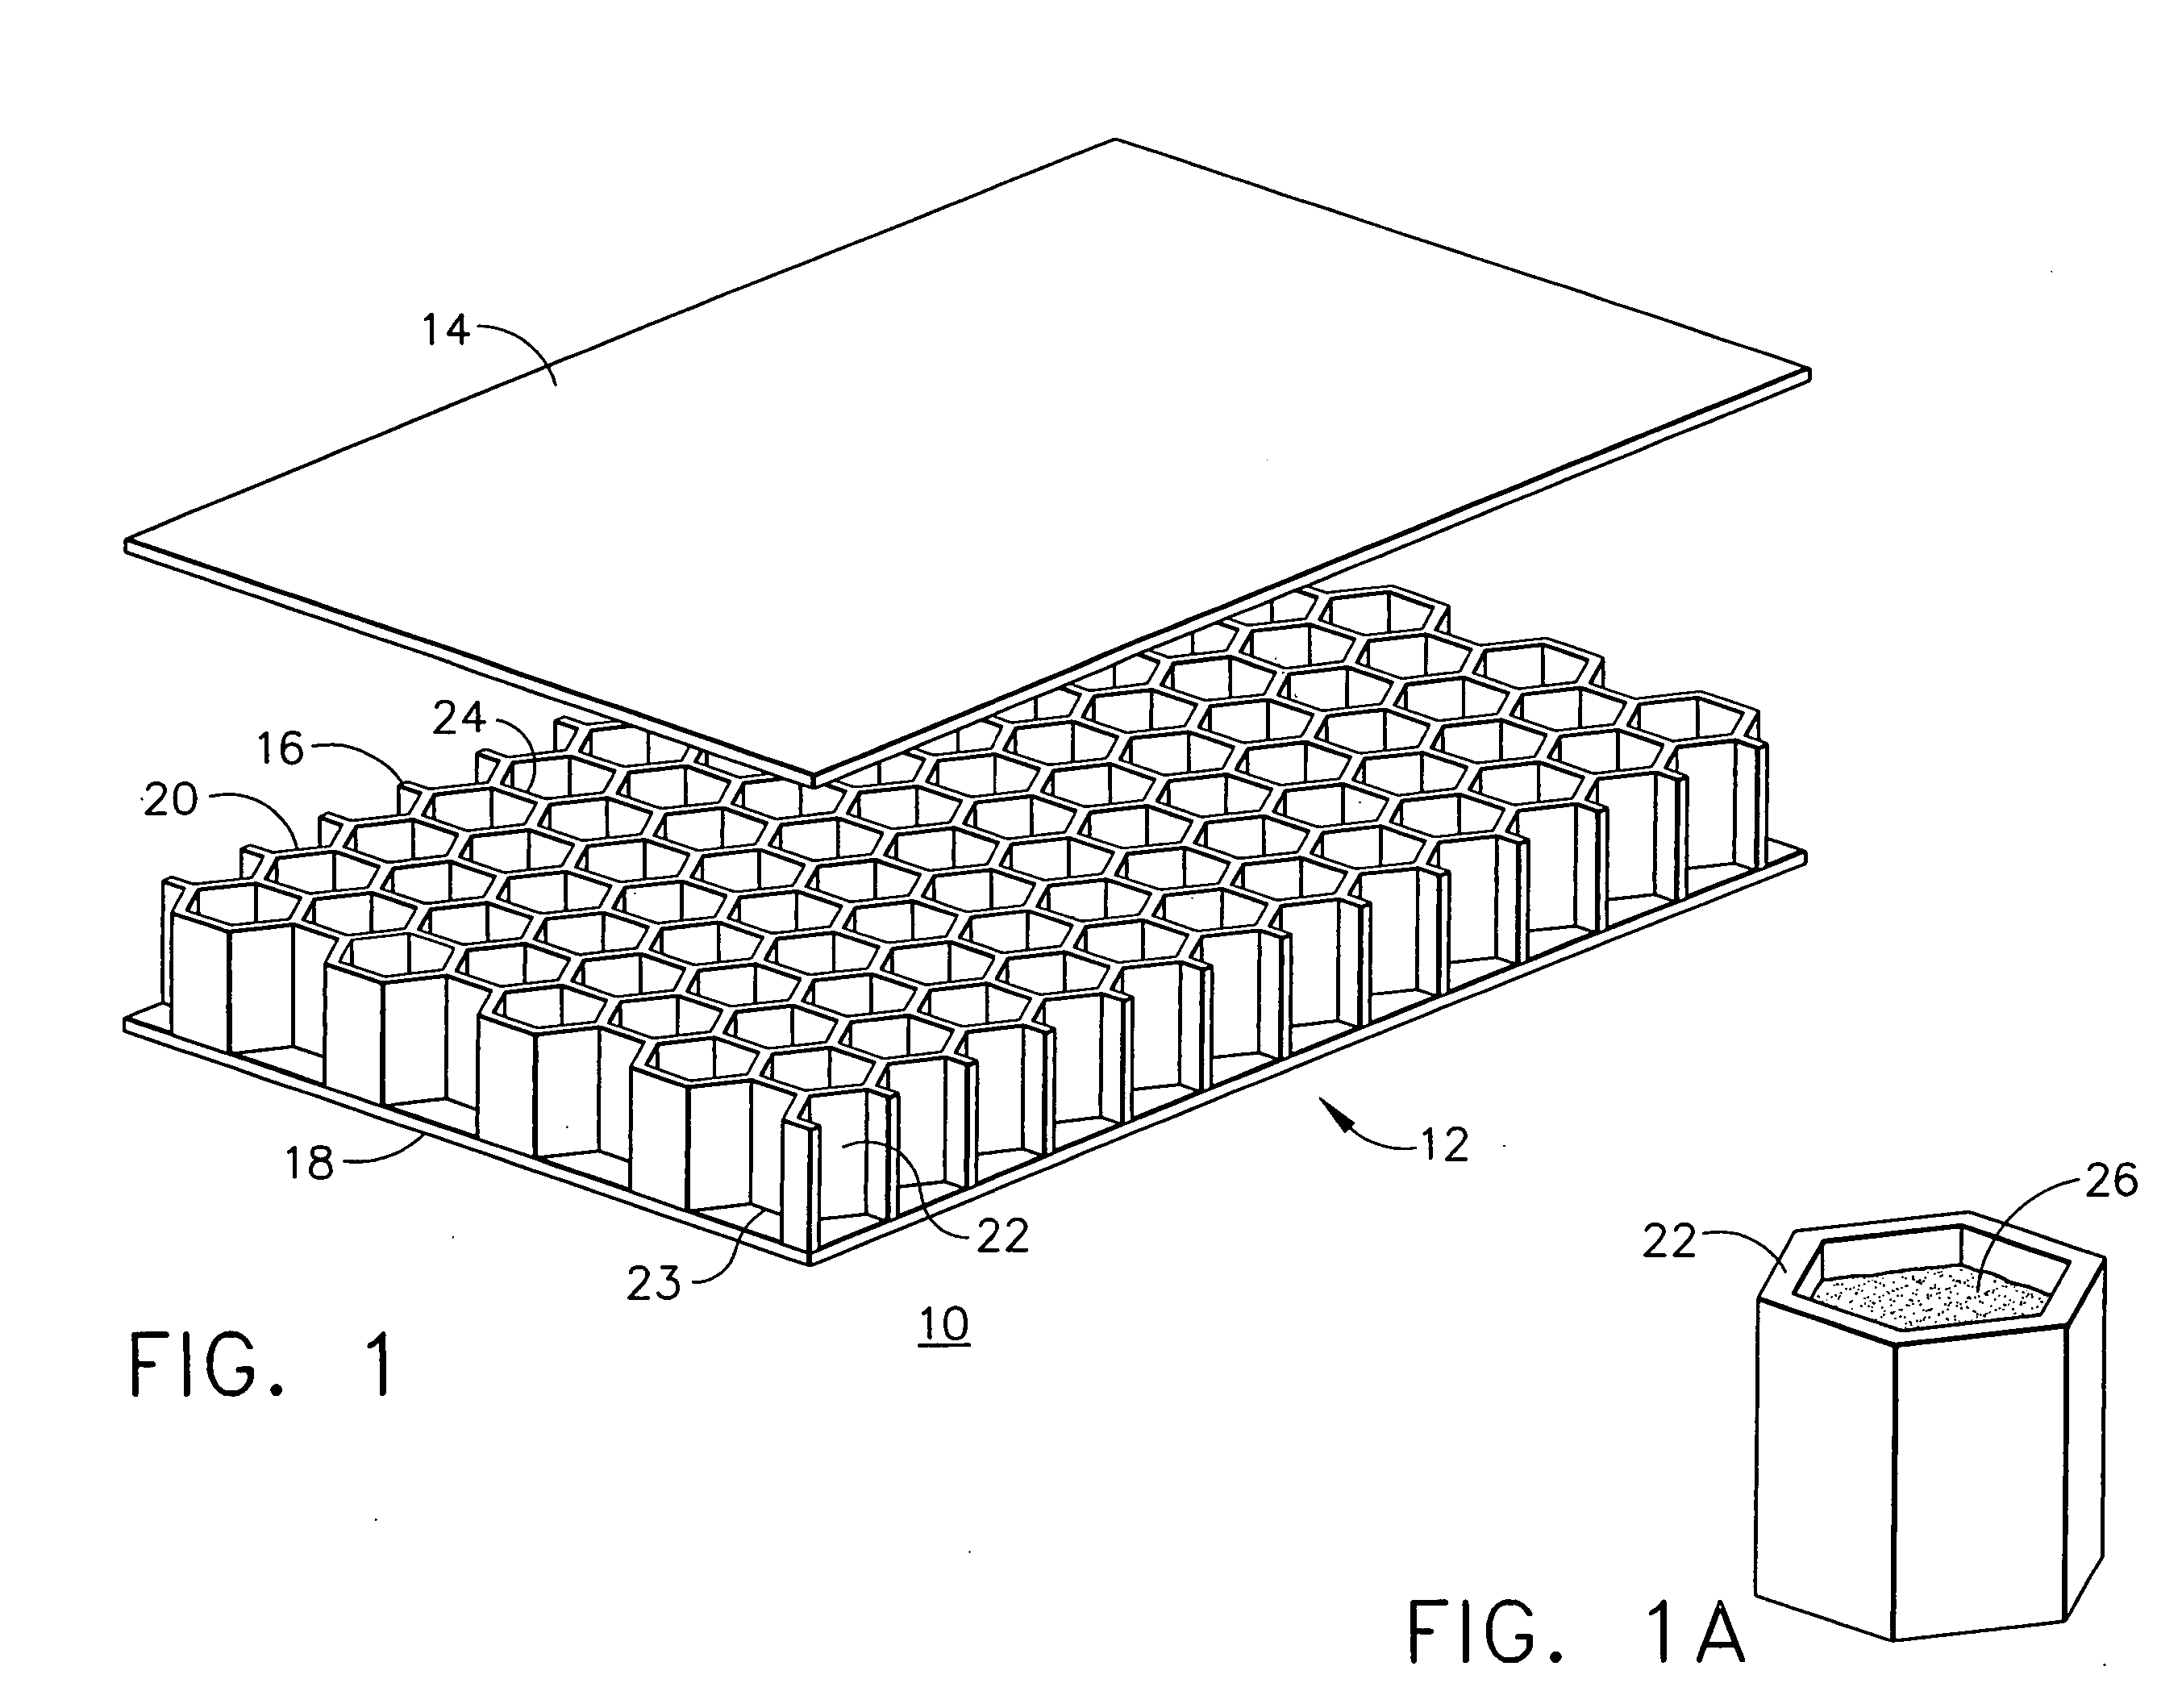 Apparatus and method for aircraft cabin noise attenuation via non-obstructive particle damping